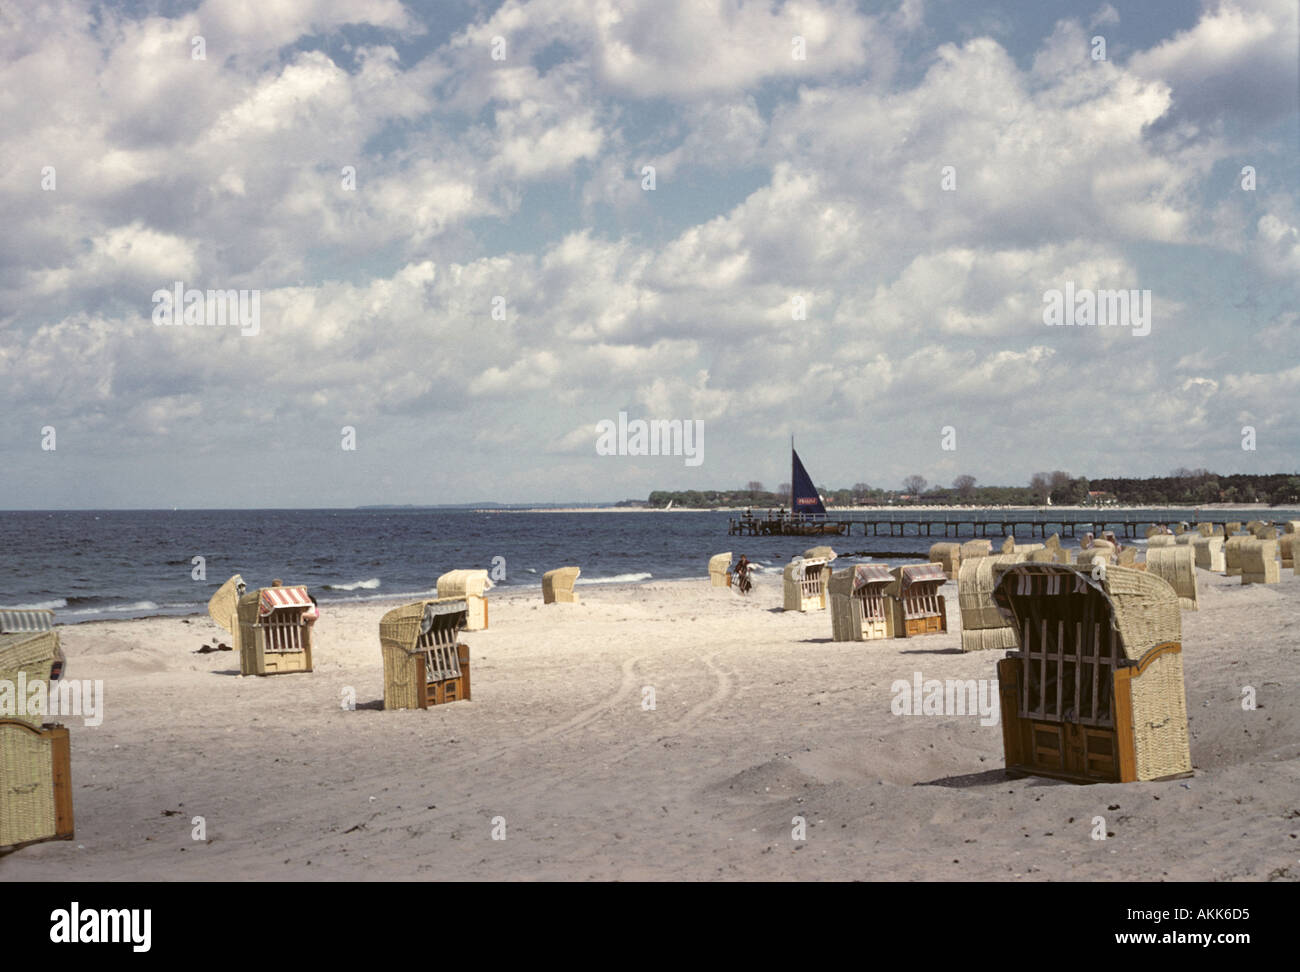 baltic sea with canopied beach chairs 1960s Stock Photo